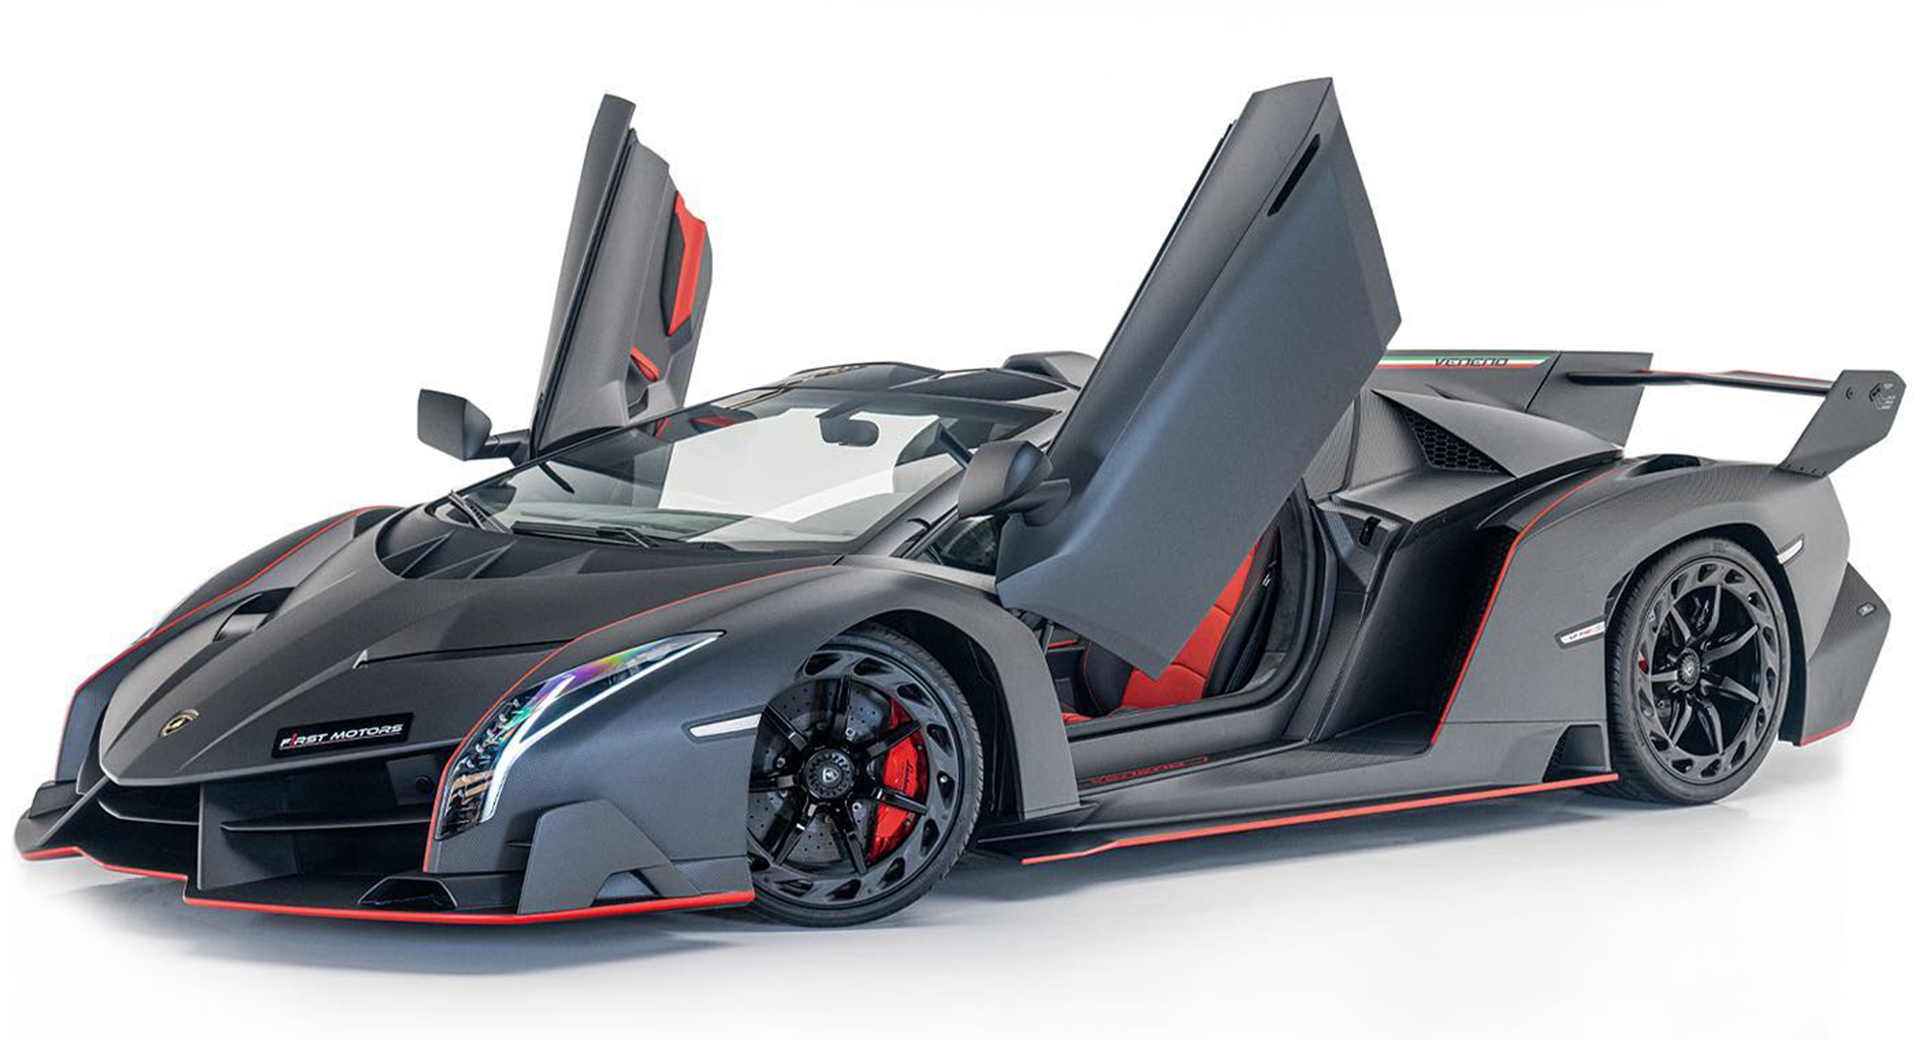 The World’s Only Exposed Carbon Veneno Needs A New Home